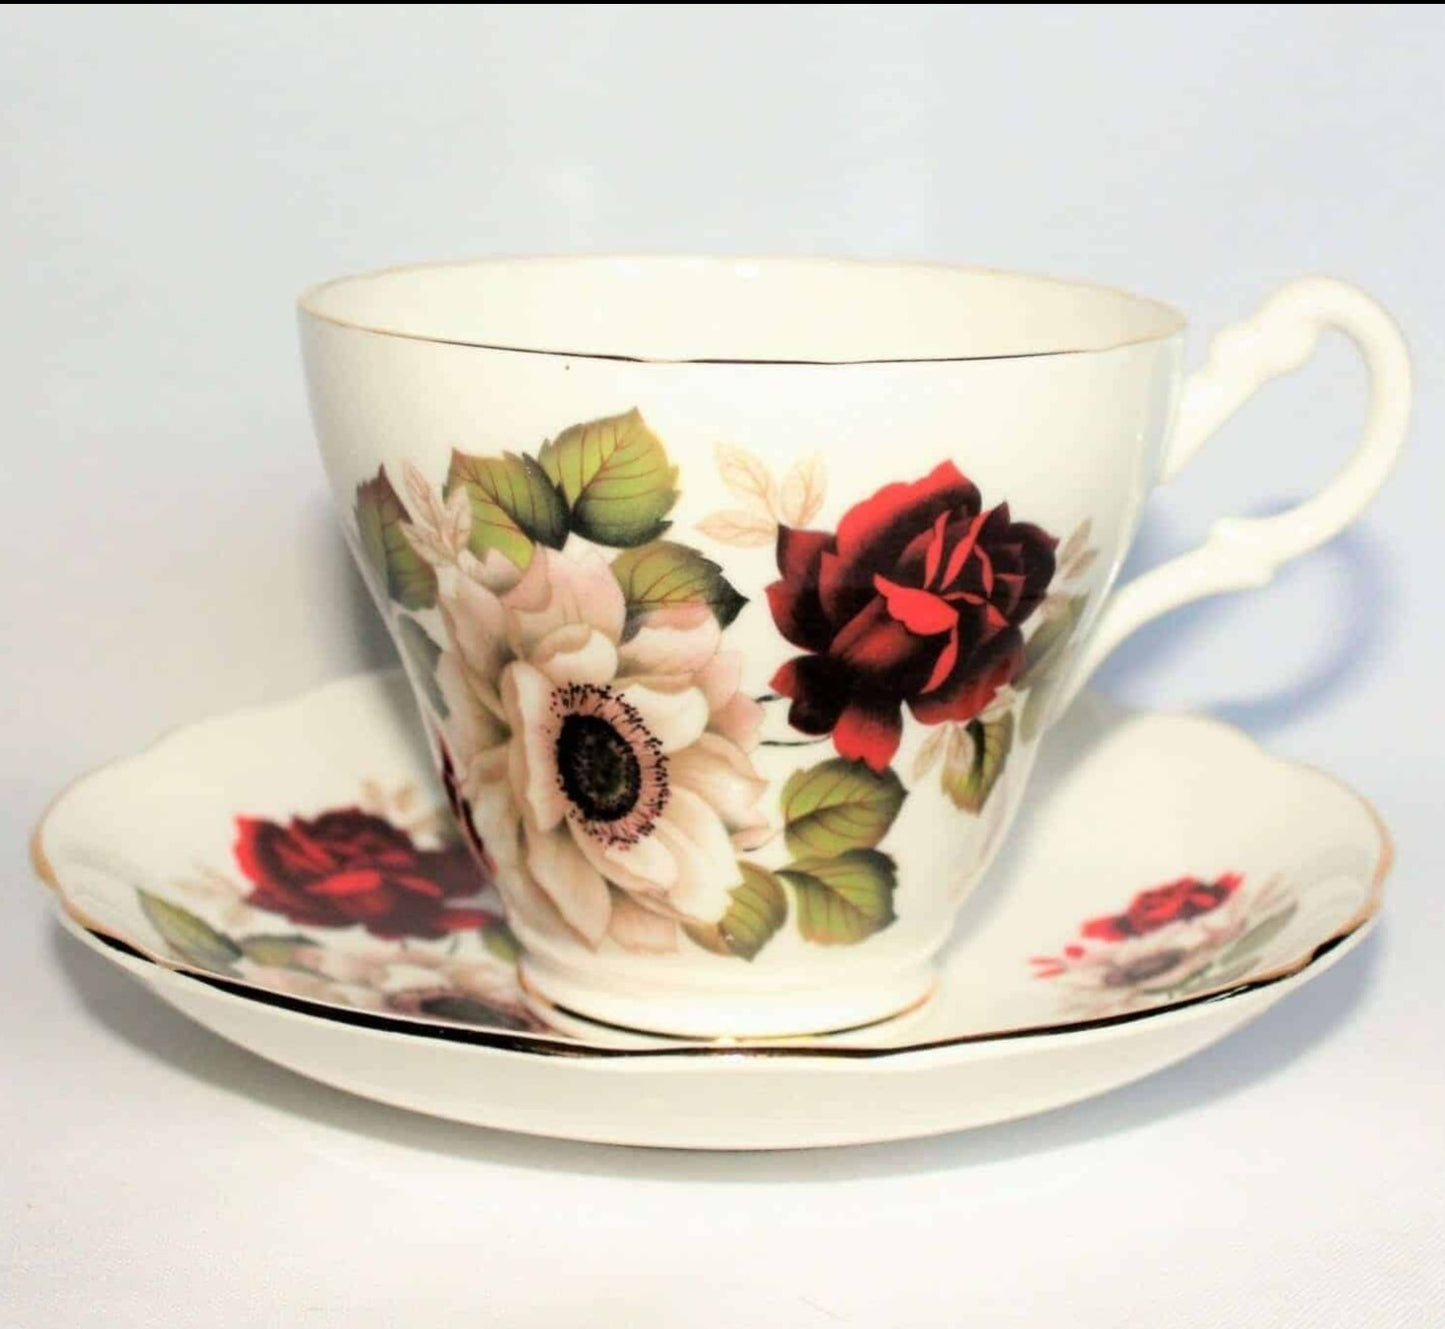 Teacup and Saucer, Royal Ascot, White & Red Floral, Bone China, Vintage